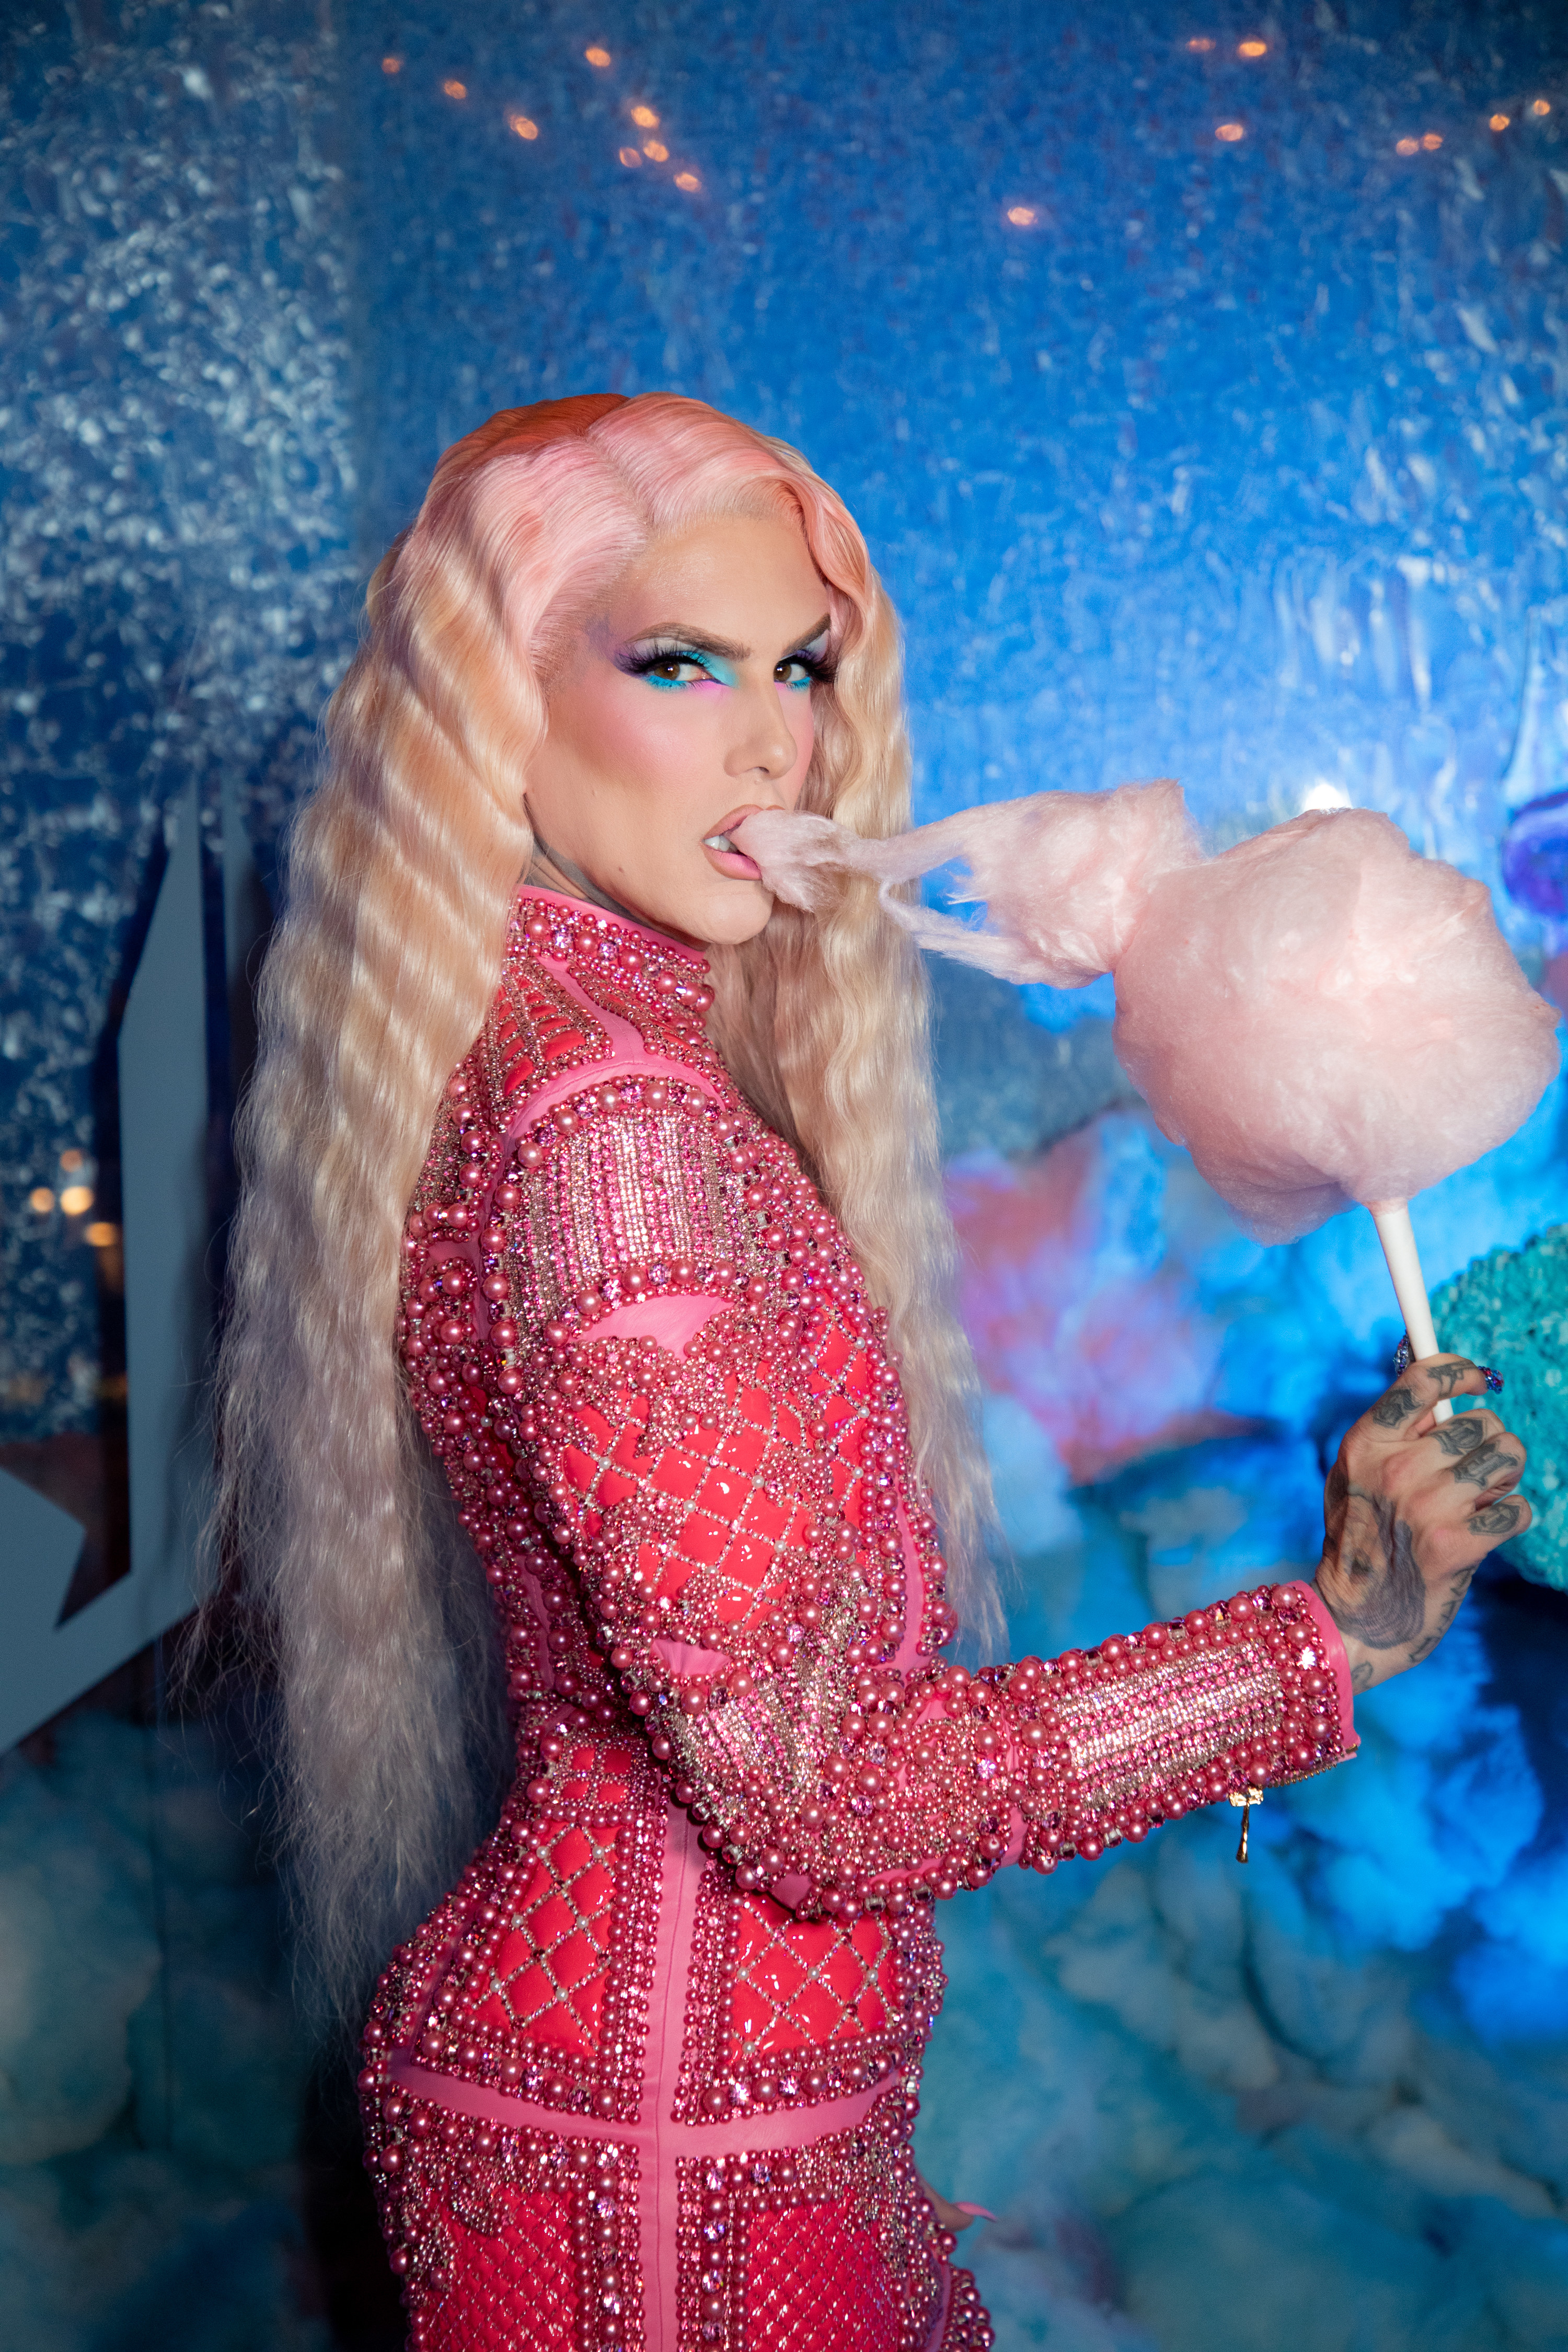 A photo of Jeffree Starr posing in a pink jewelled dress, long blonde hair, eating cotton candy